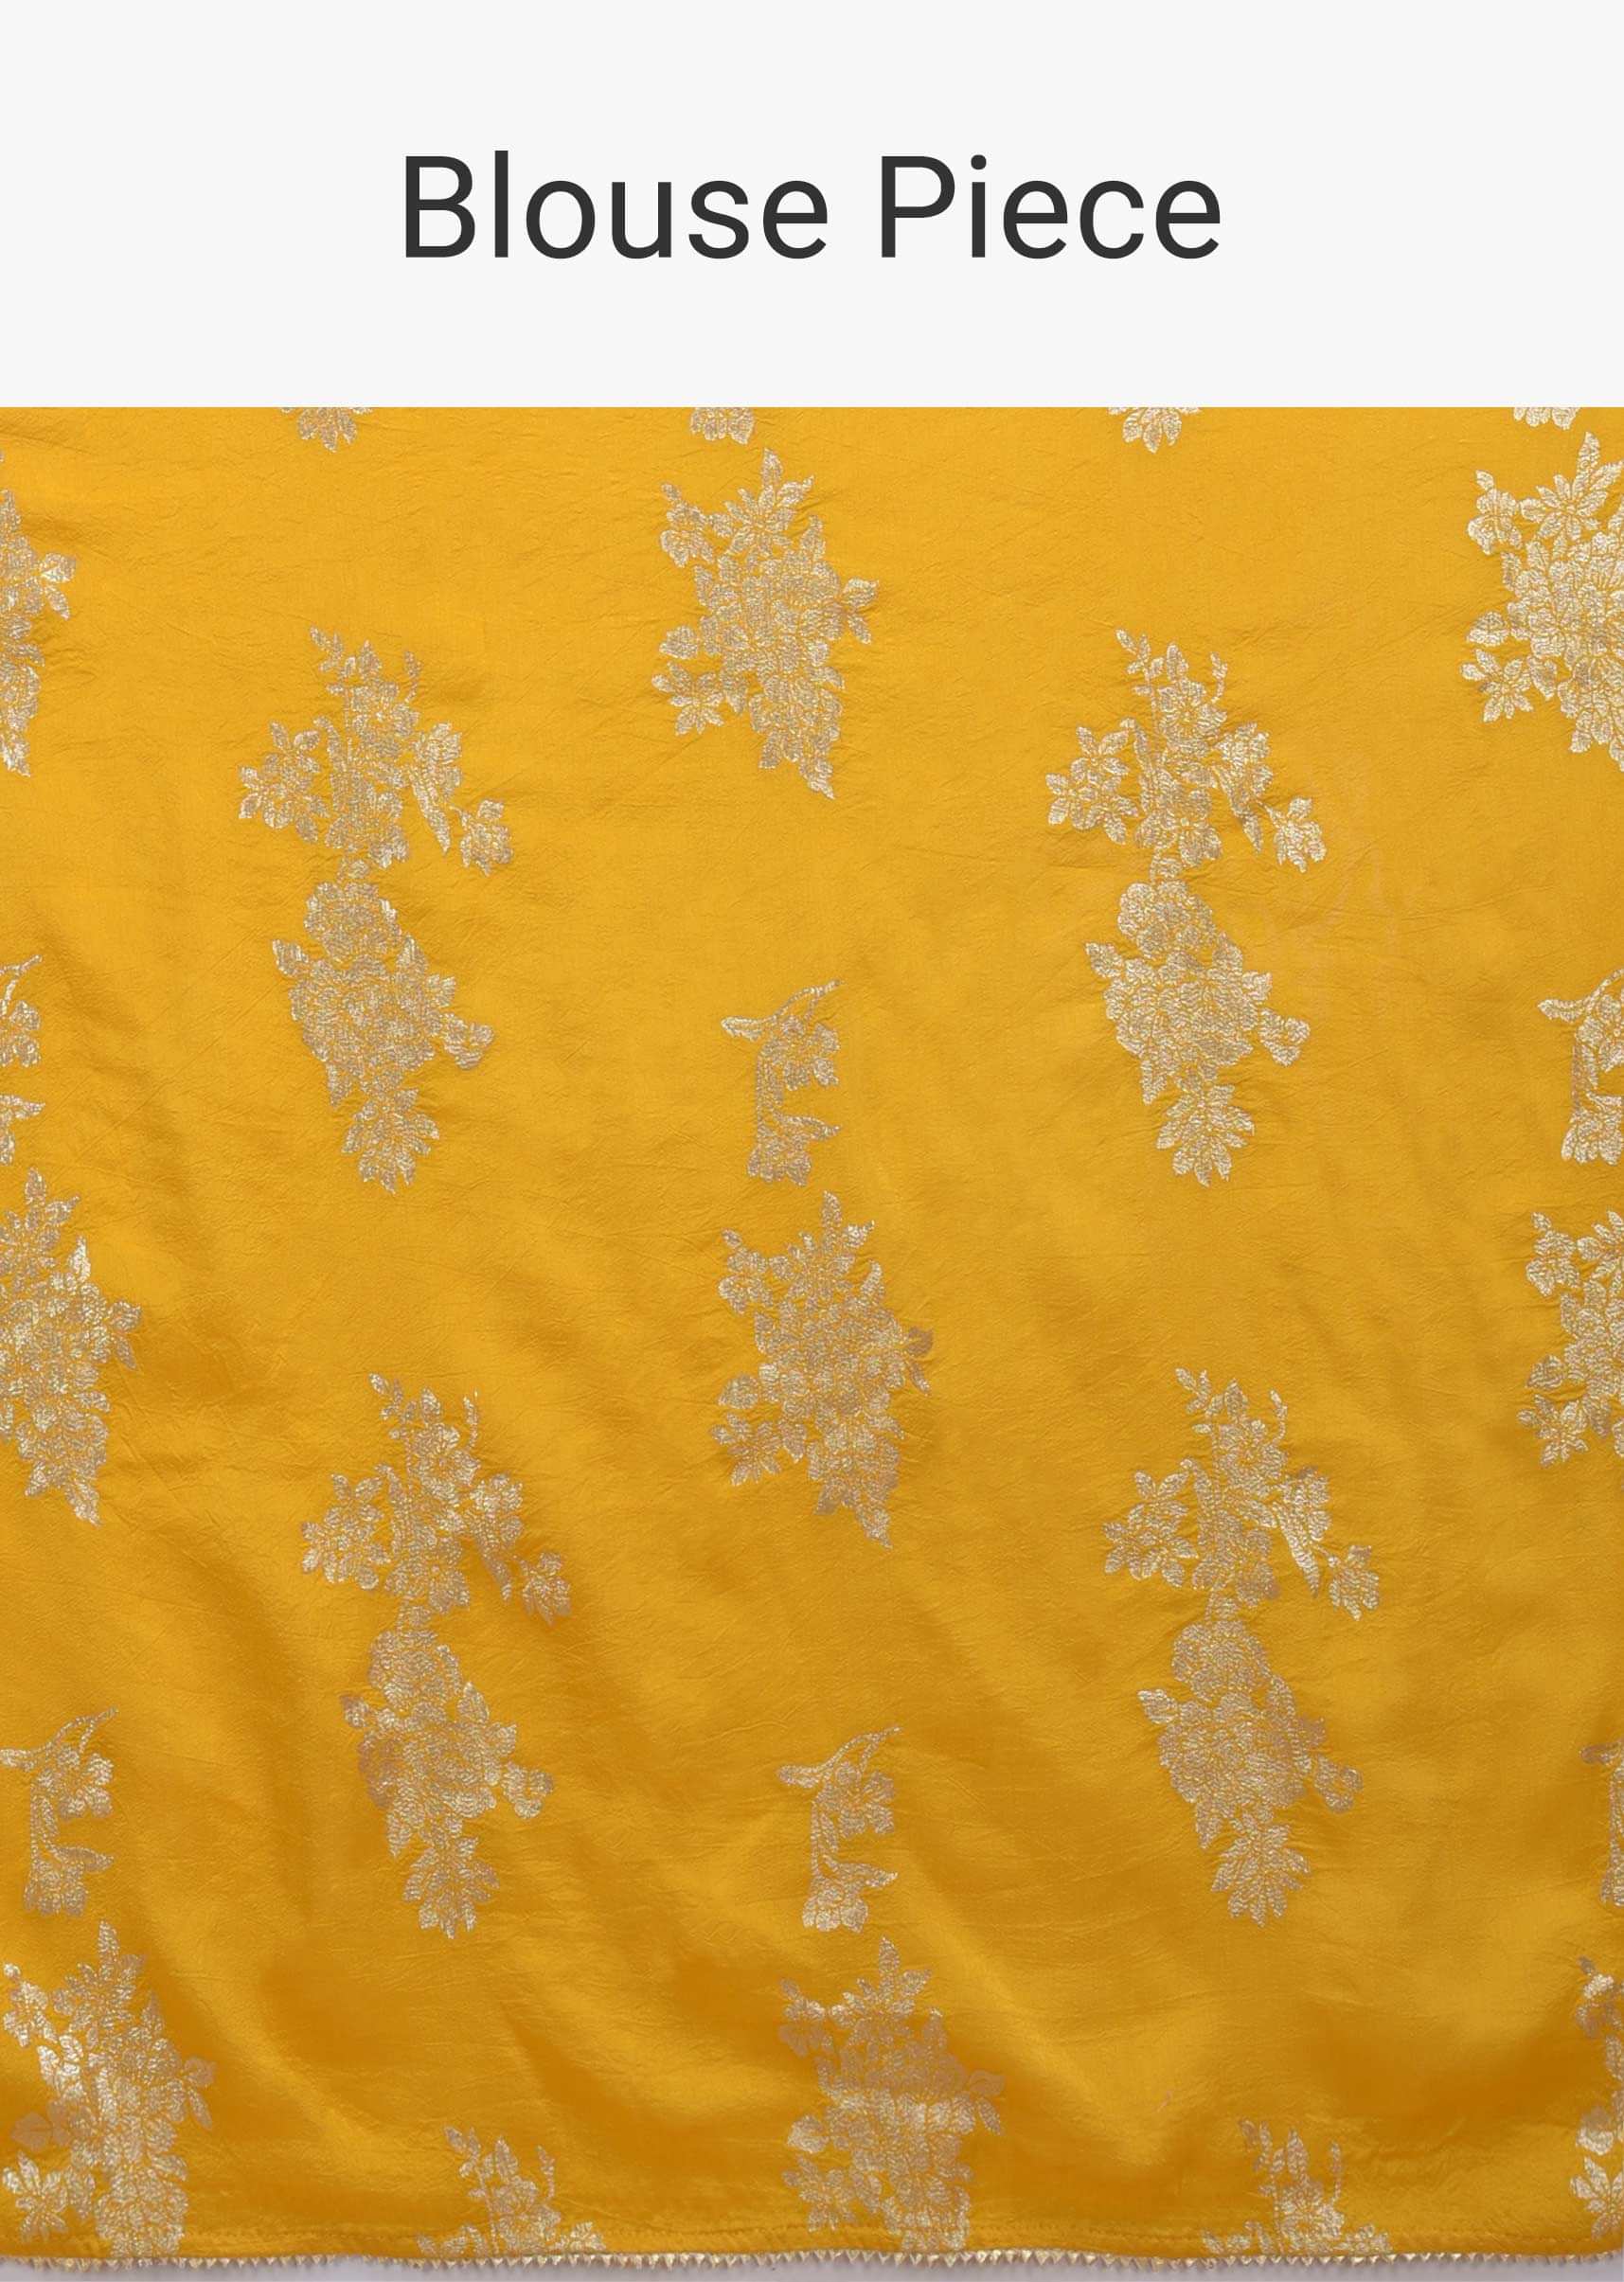 Dandelion Yellow Saree In Silk With Weaved Floral Motifs In Repeat Pattern